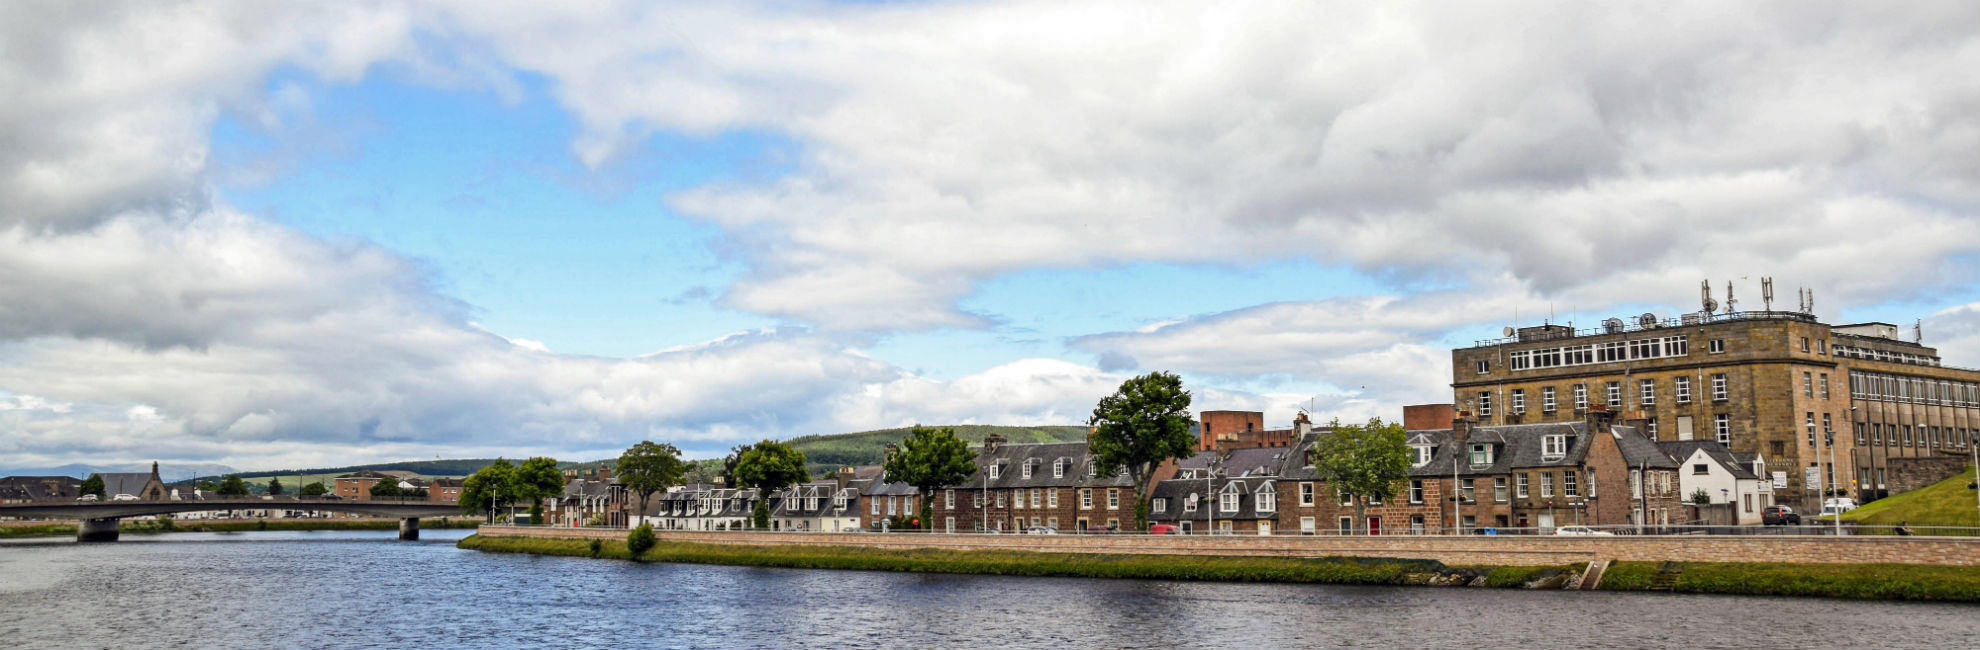 The town of Inverness of the water's edge of the River Ness in Scotland